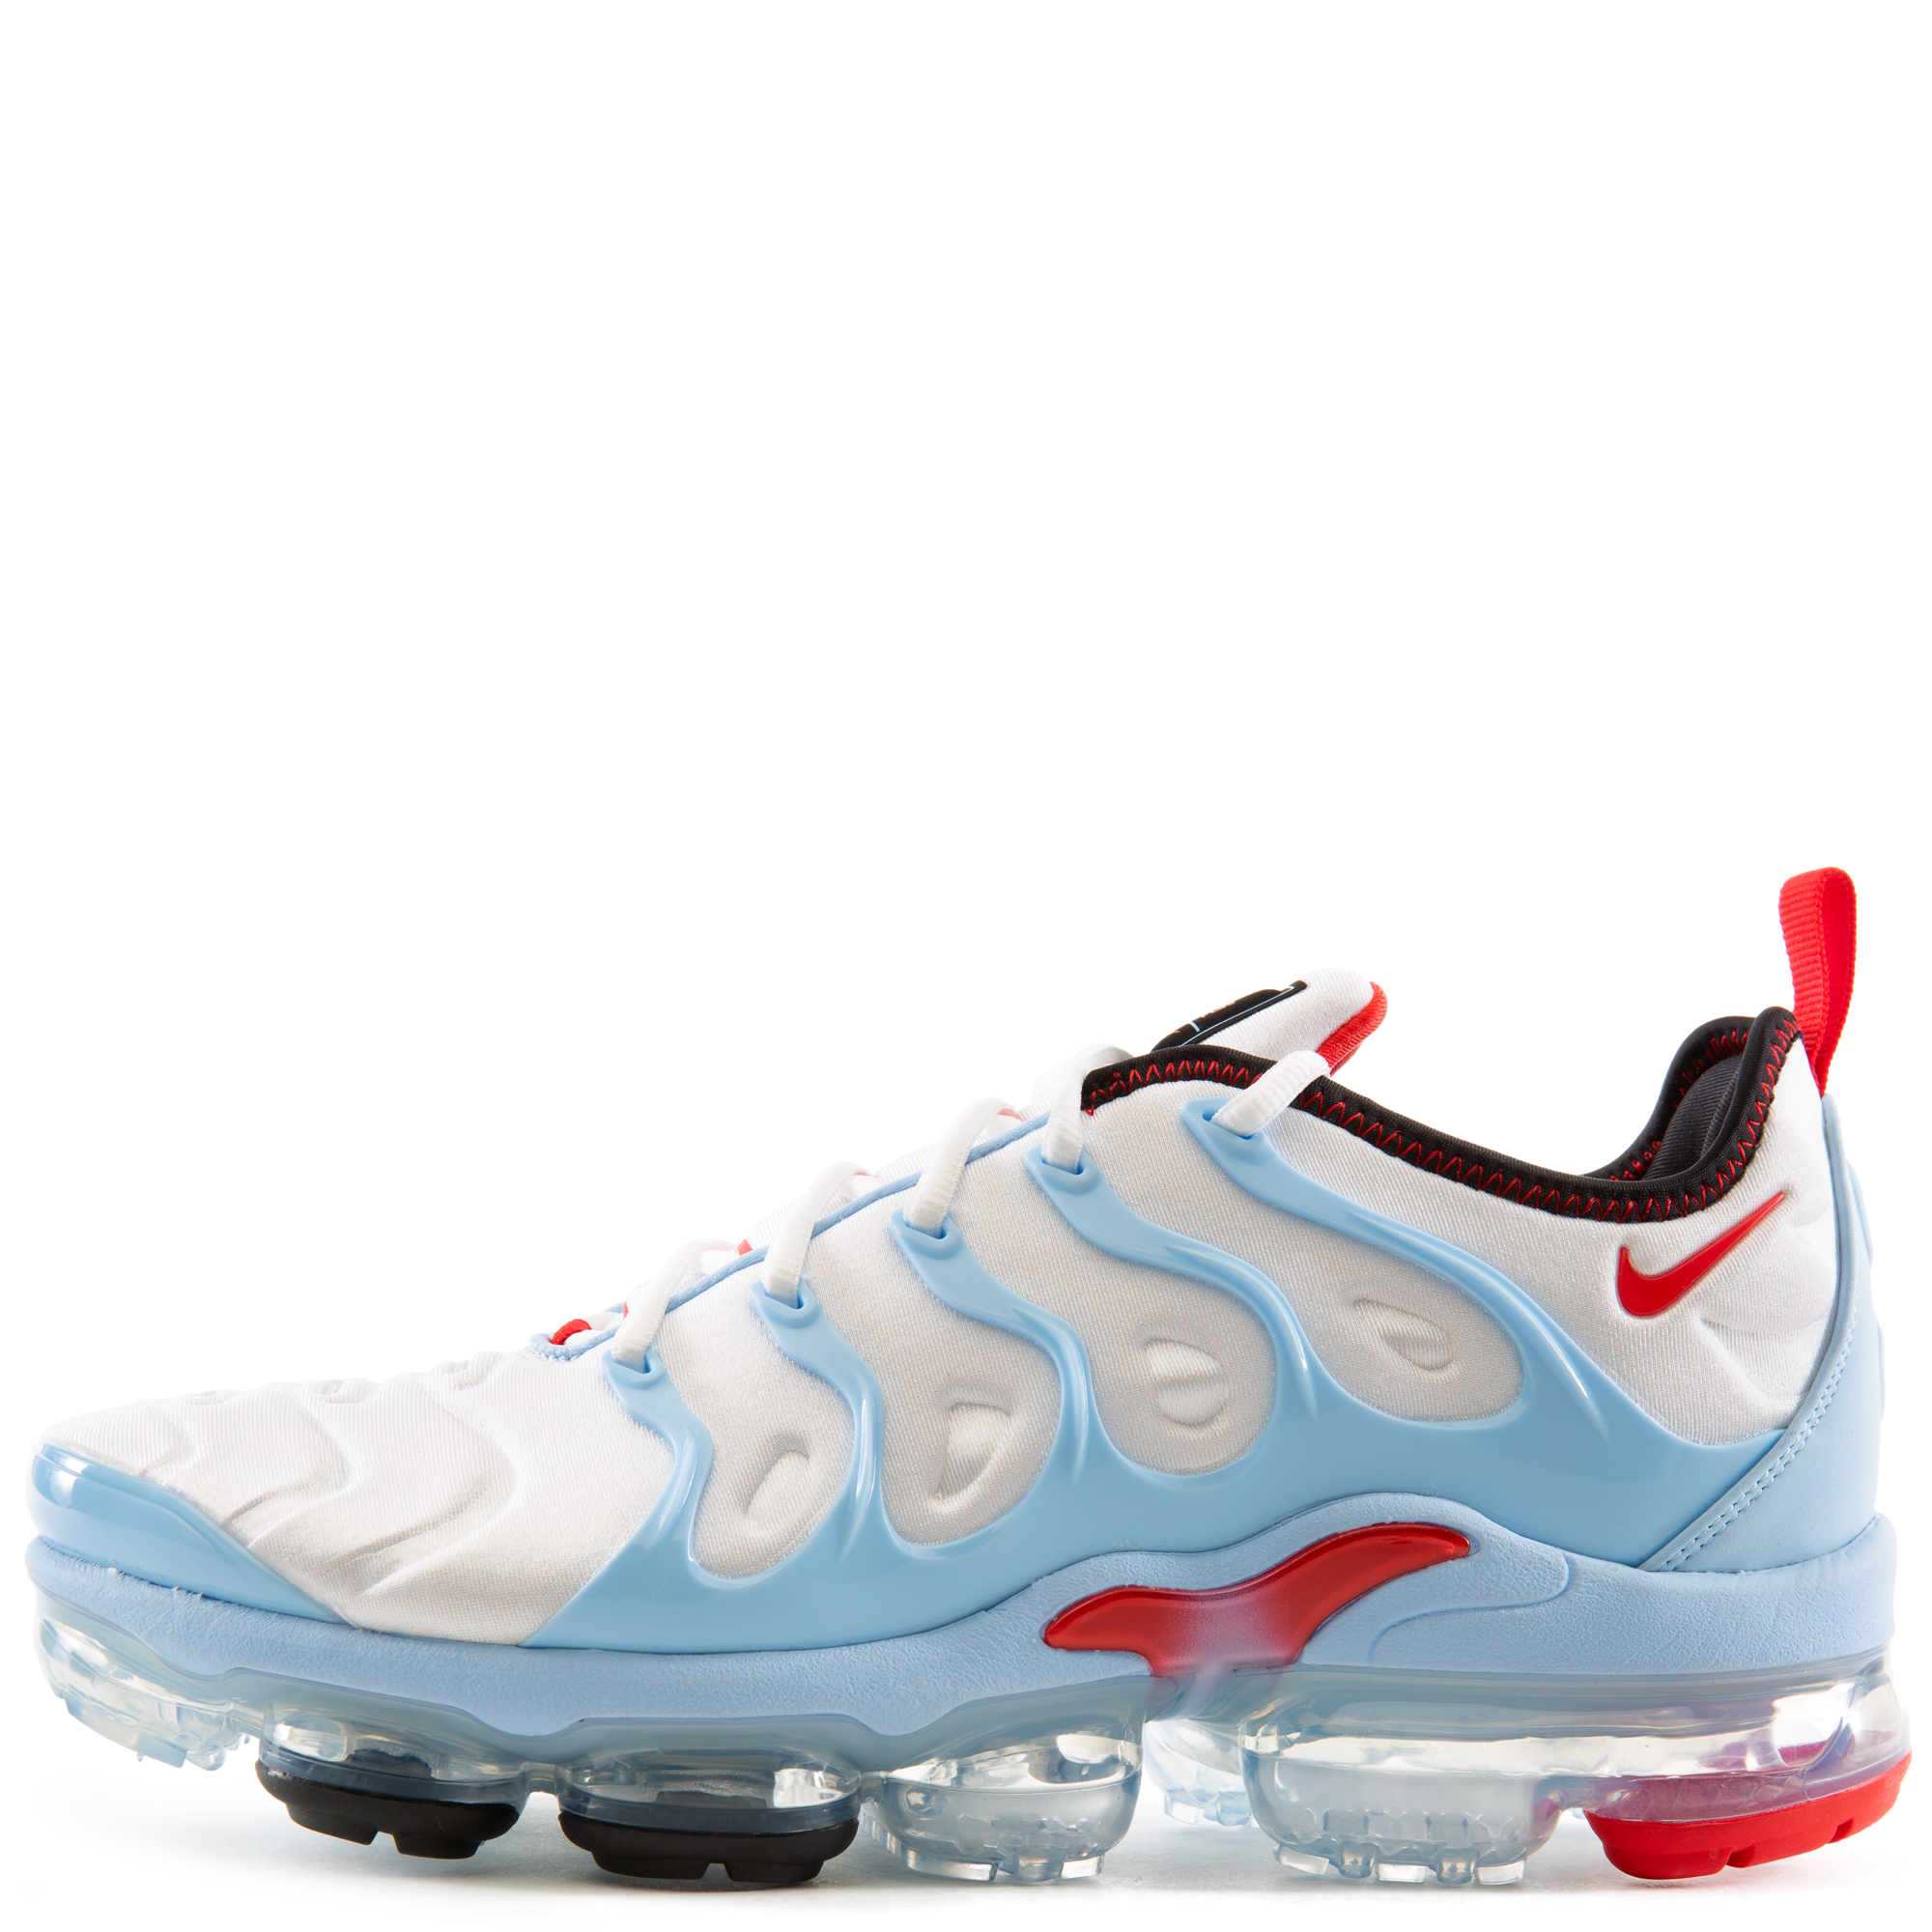 vapormax plus white red and blue